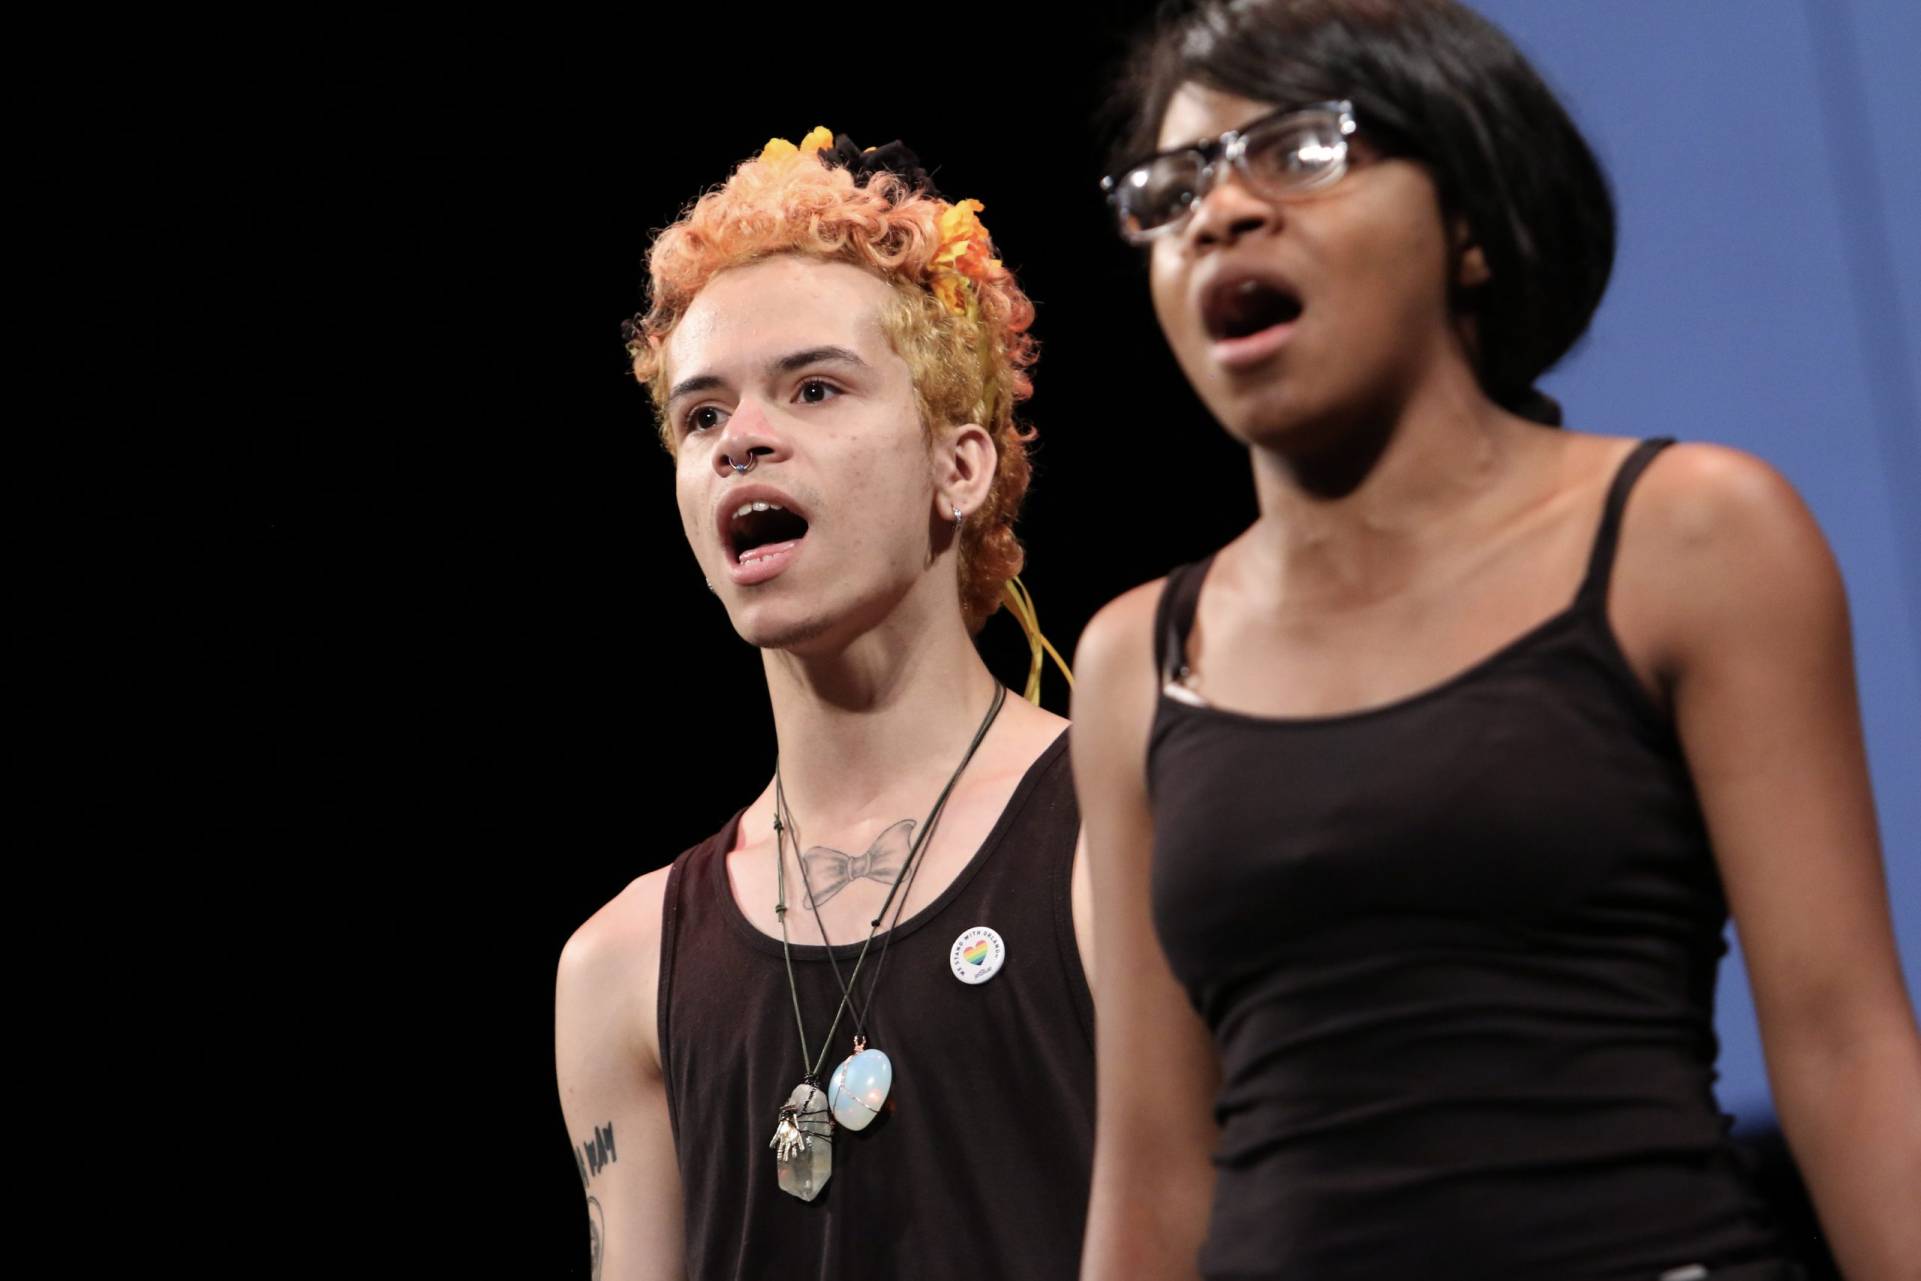 Two singers - one with a nose ring, dyed hair, and tattoo and other young black female presenting person